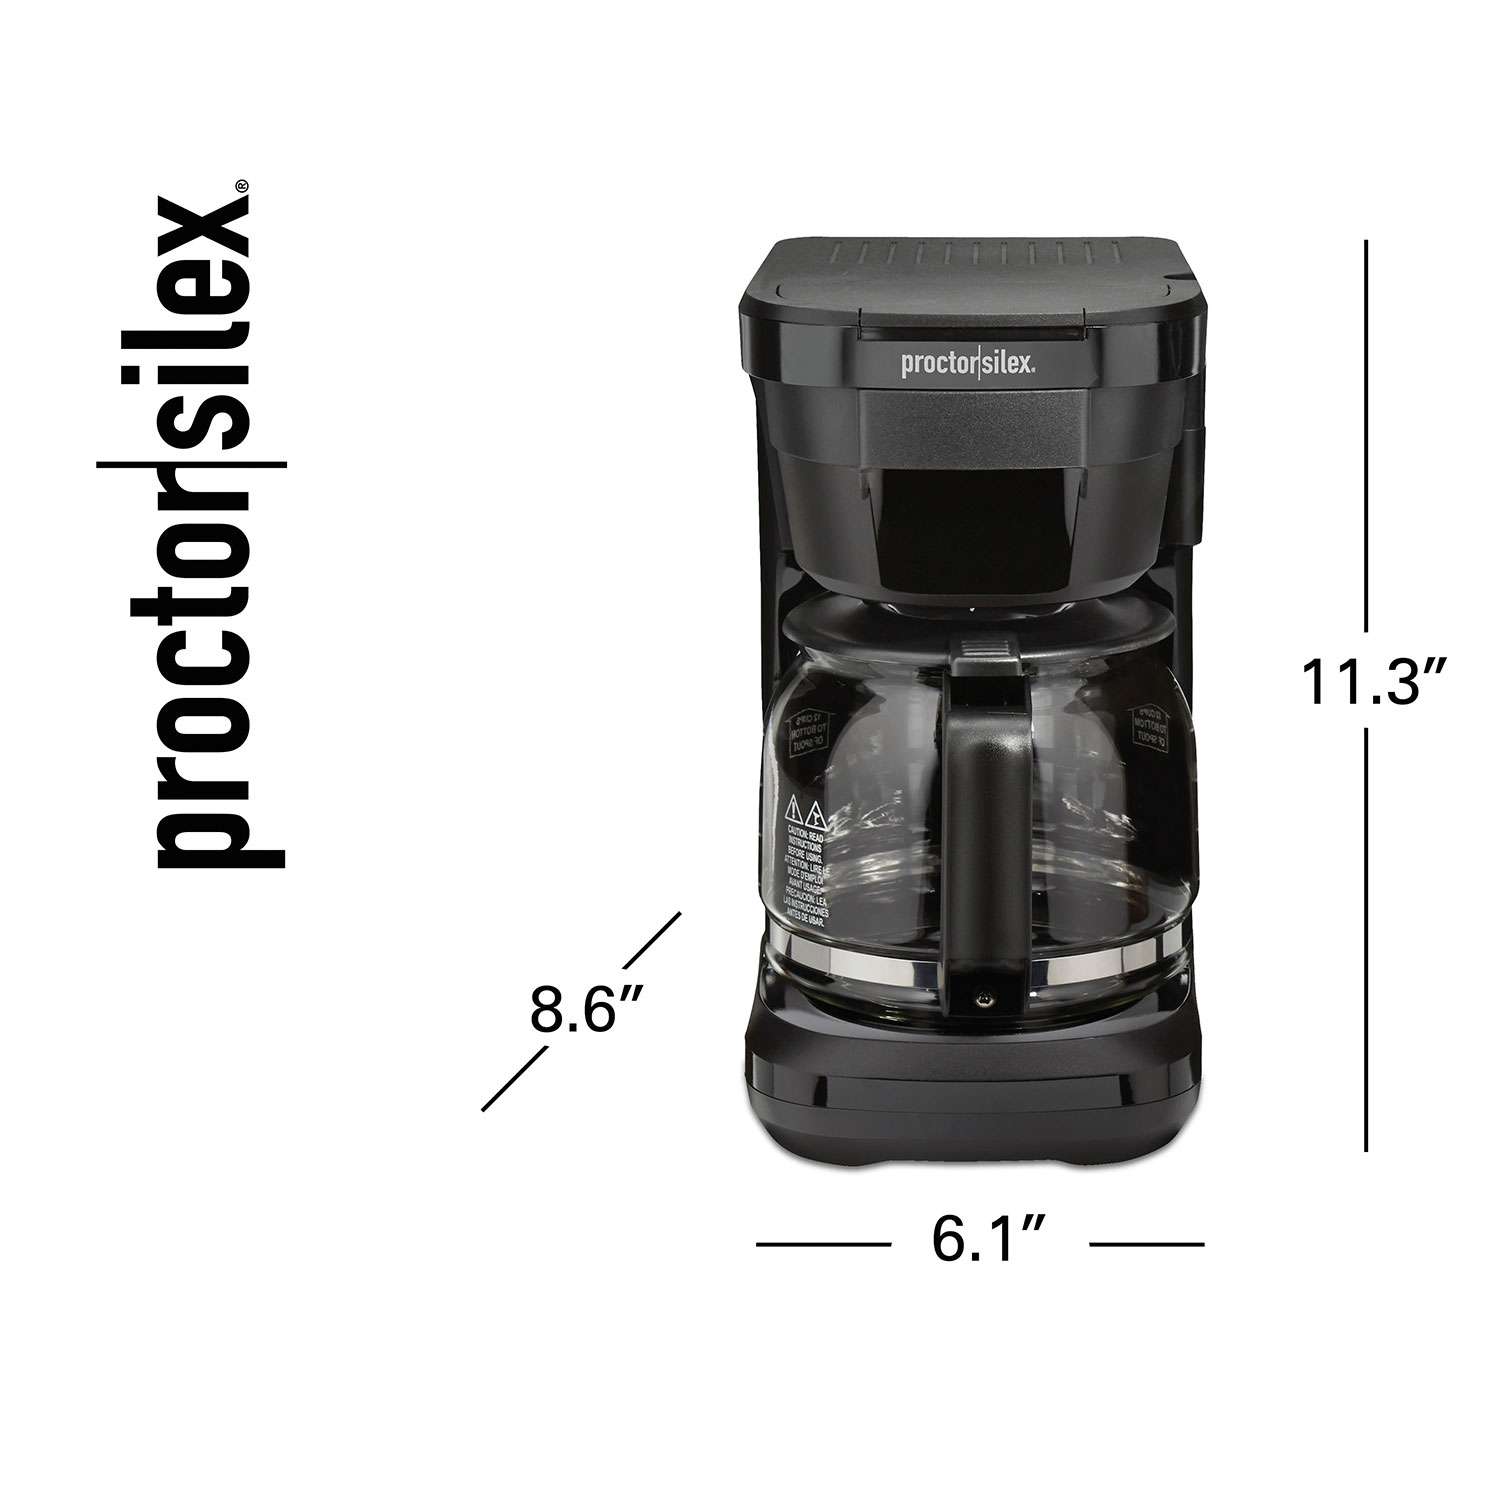 Replacement Coffee Carafe for Black and Decker 12-CUP Coffee Maker, Black  Handle